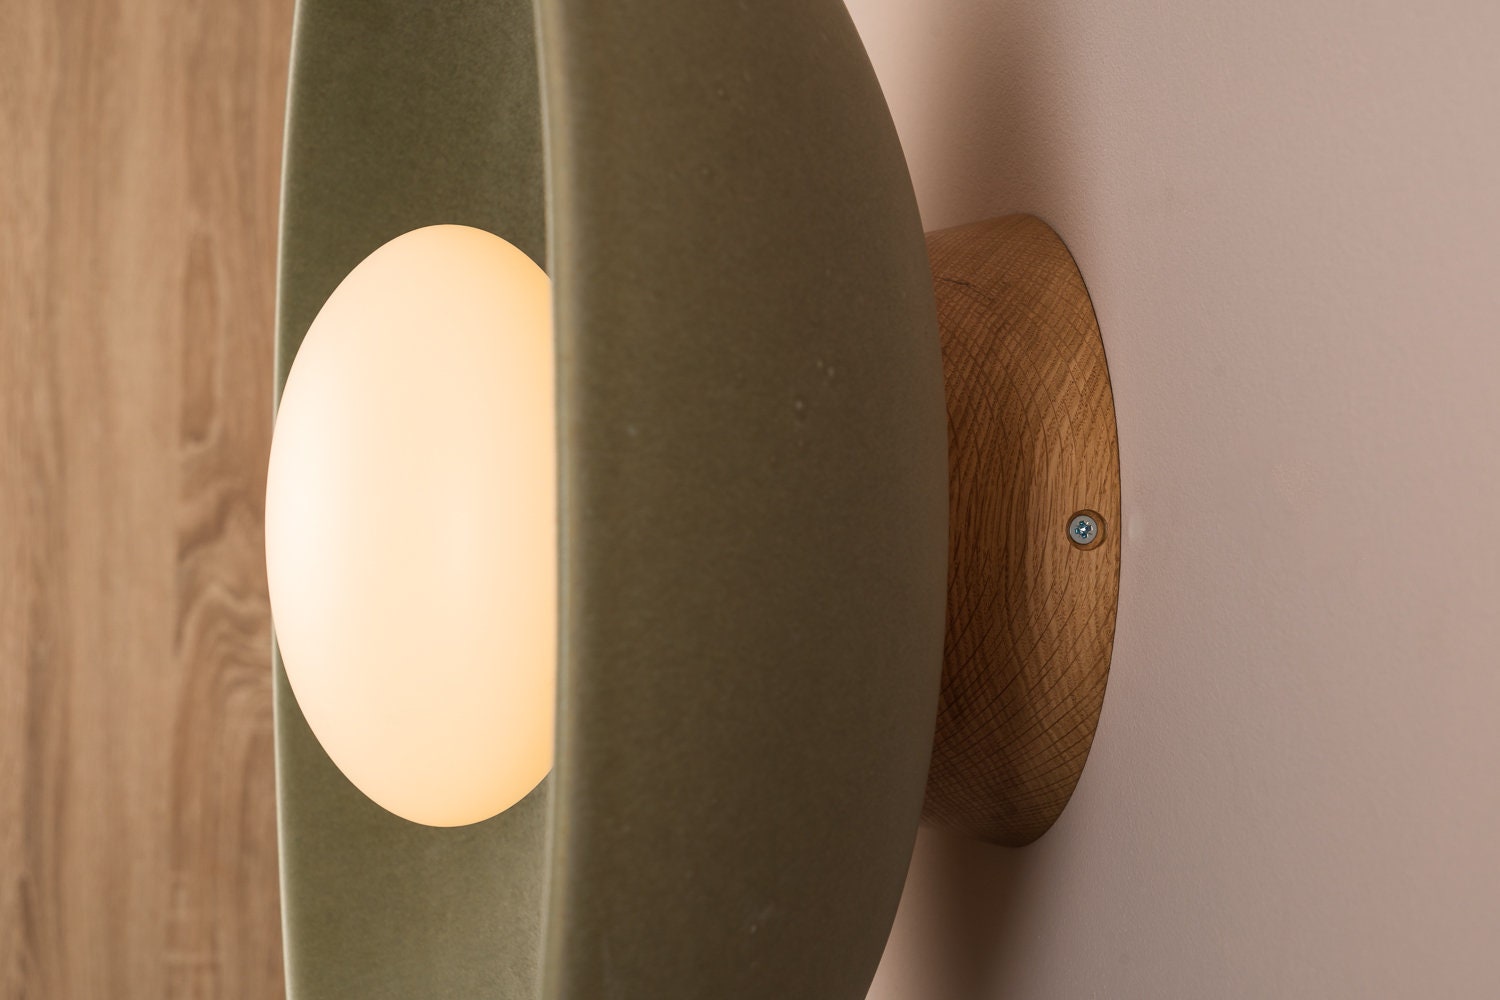 Green XL Dawn Wall Light Sconce in Ceramic and Oak by StudioHaran